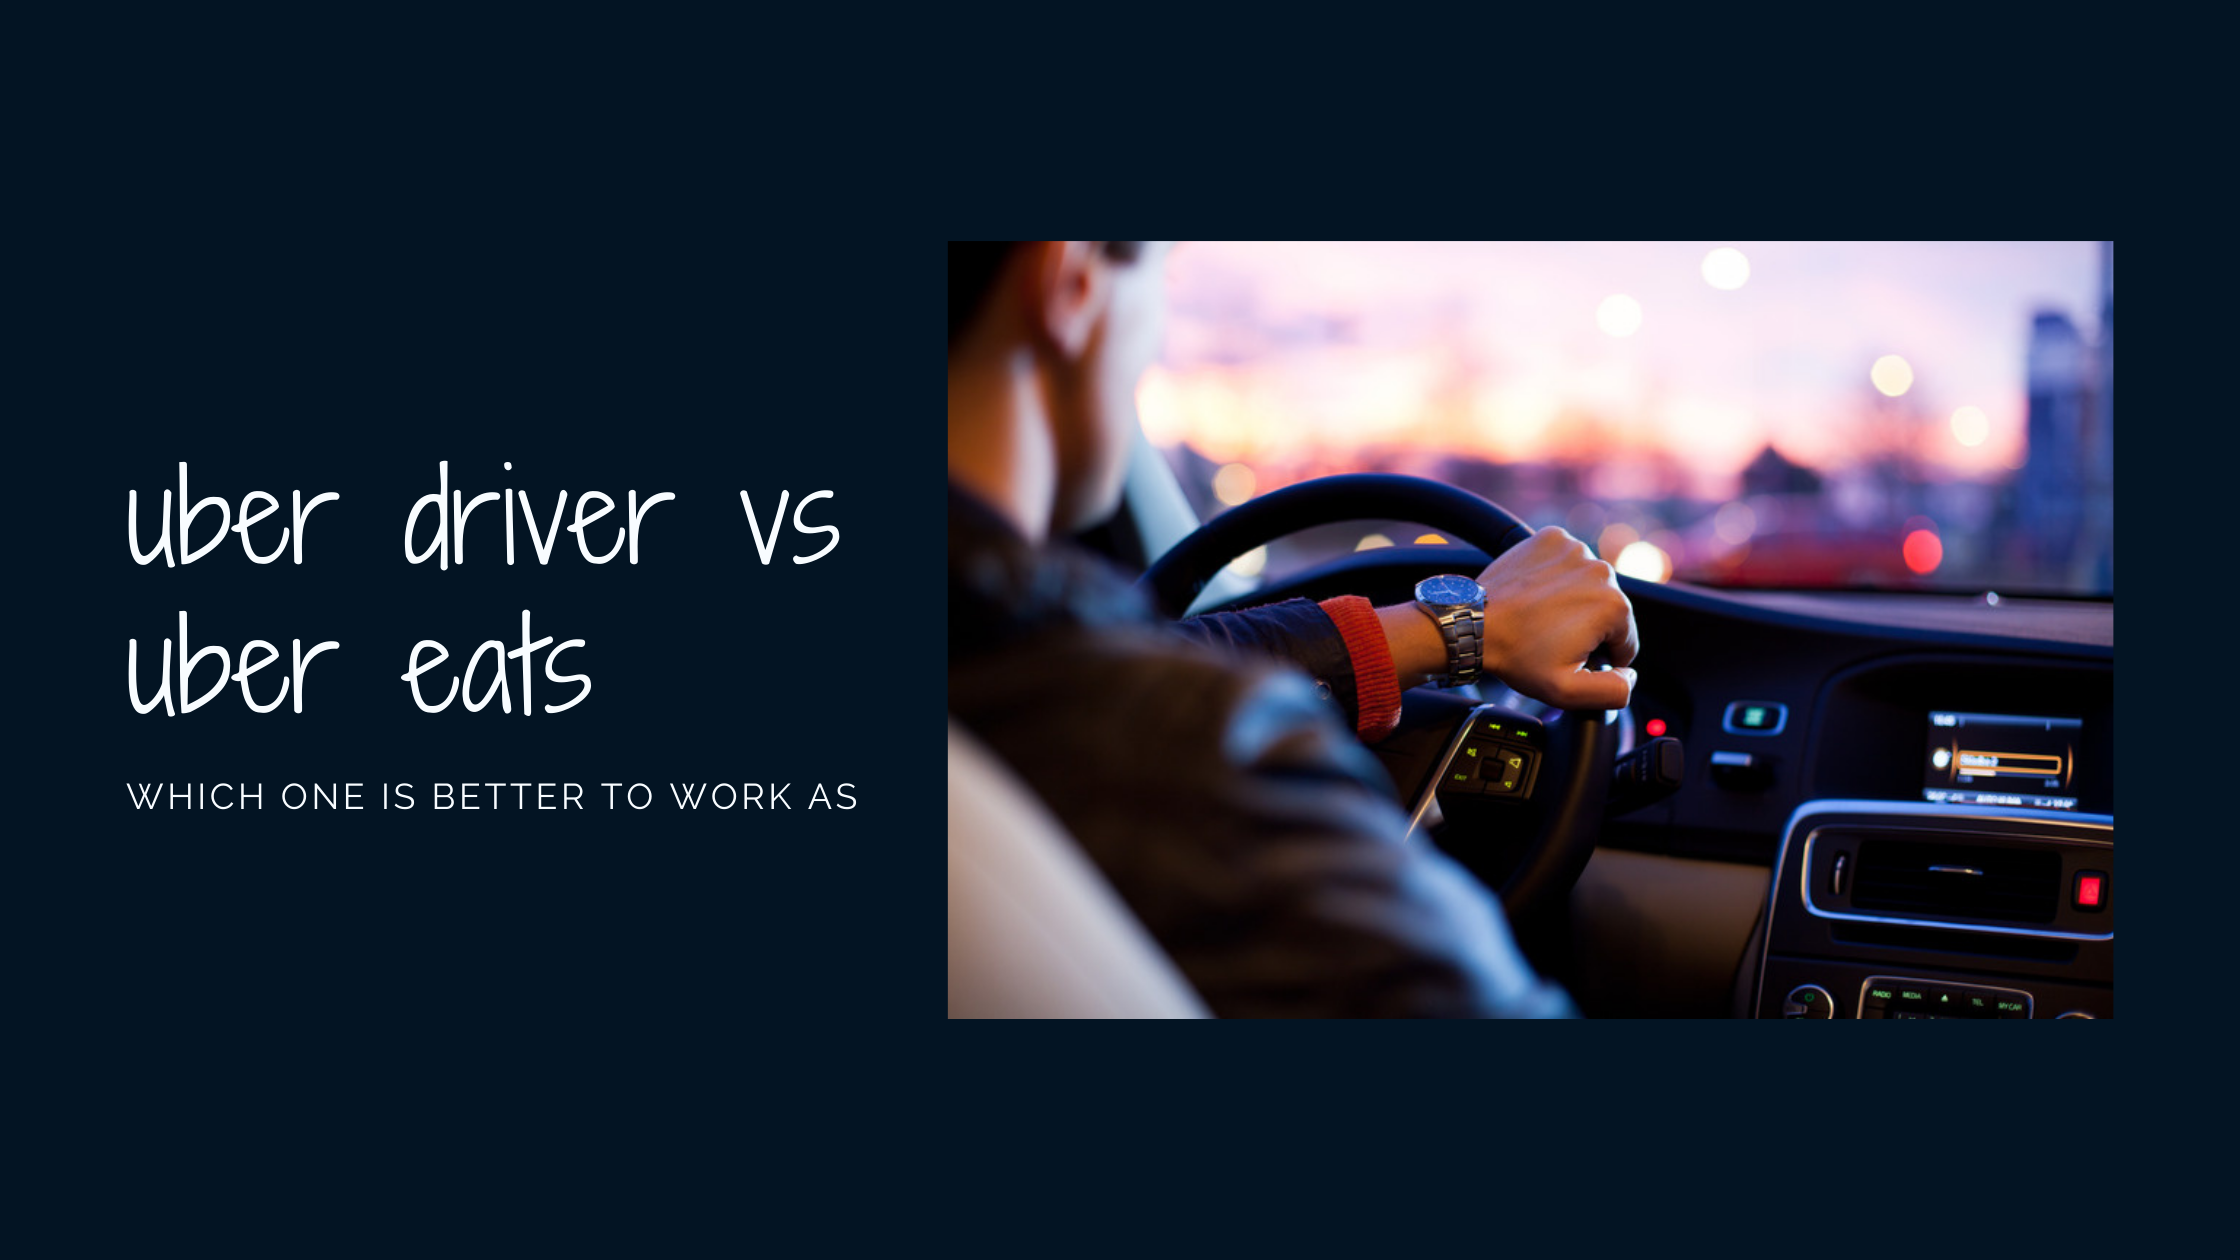 Uber Driver Vs Uber Eats: Which Is Better For Work